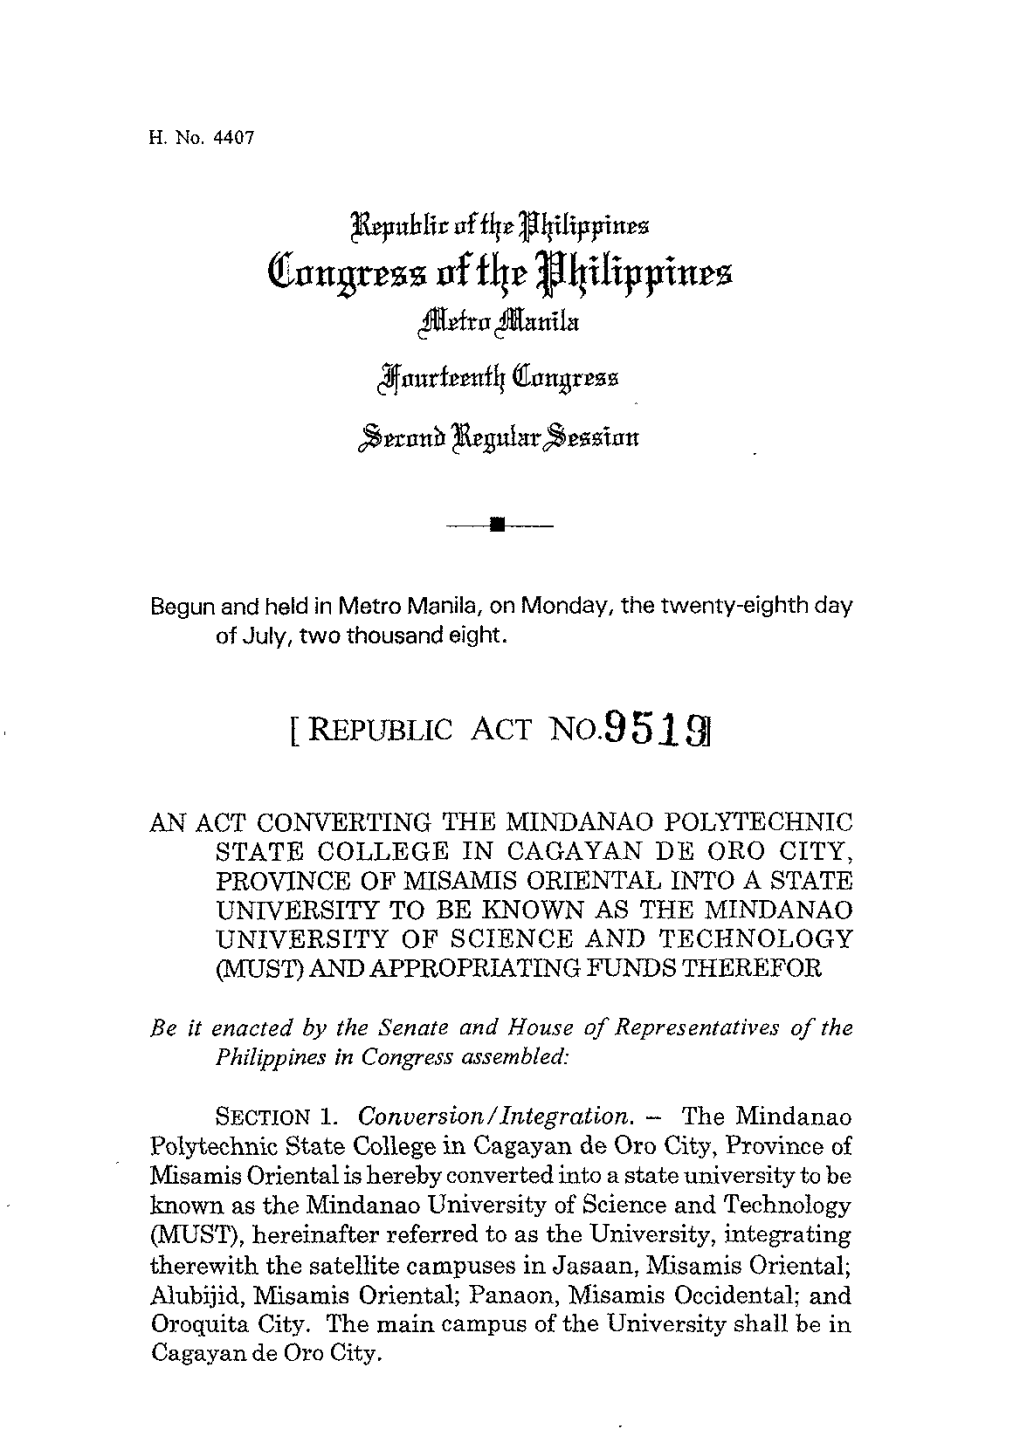 Begun and Held in Metro Manila, on Monday, the Twenty-Eighth Day of July, Two Thousand Eight